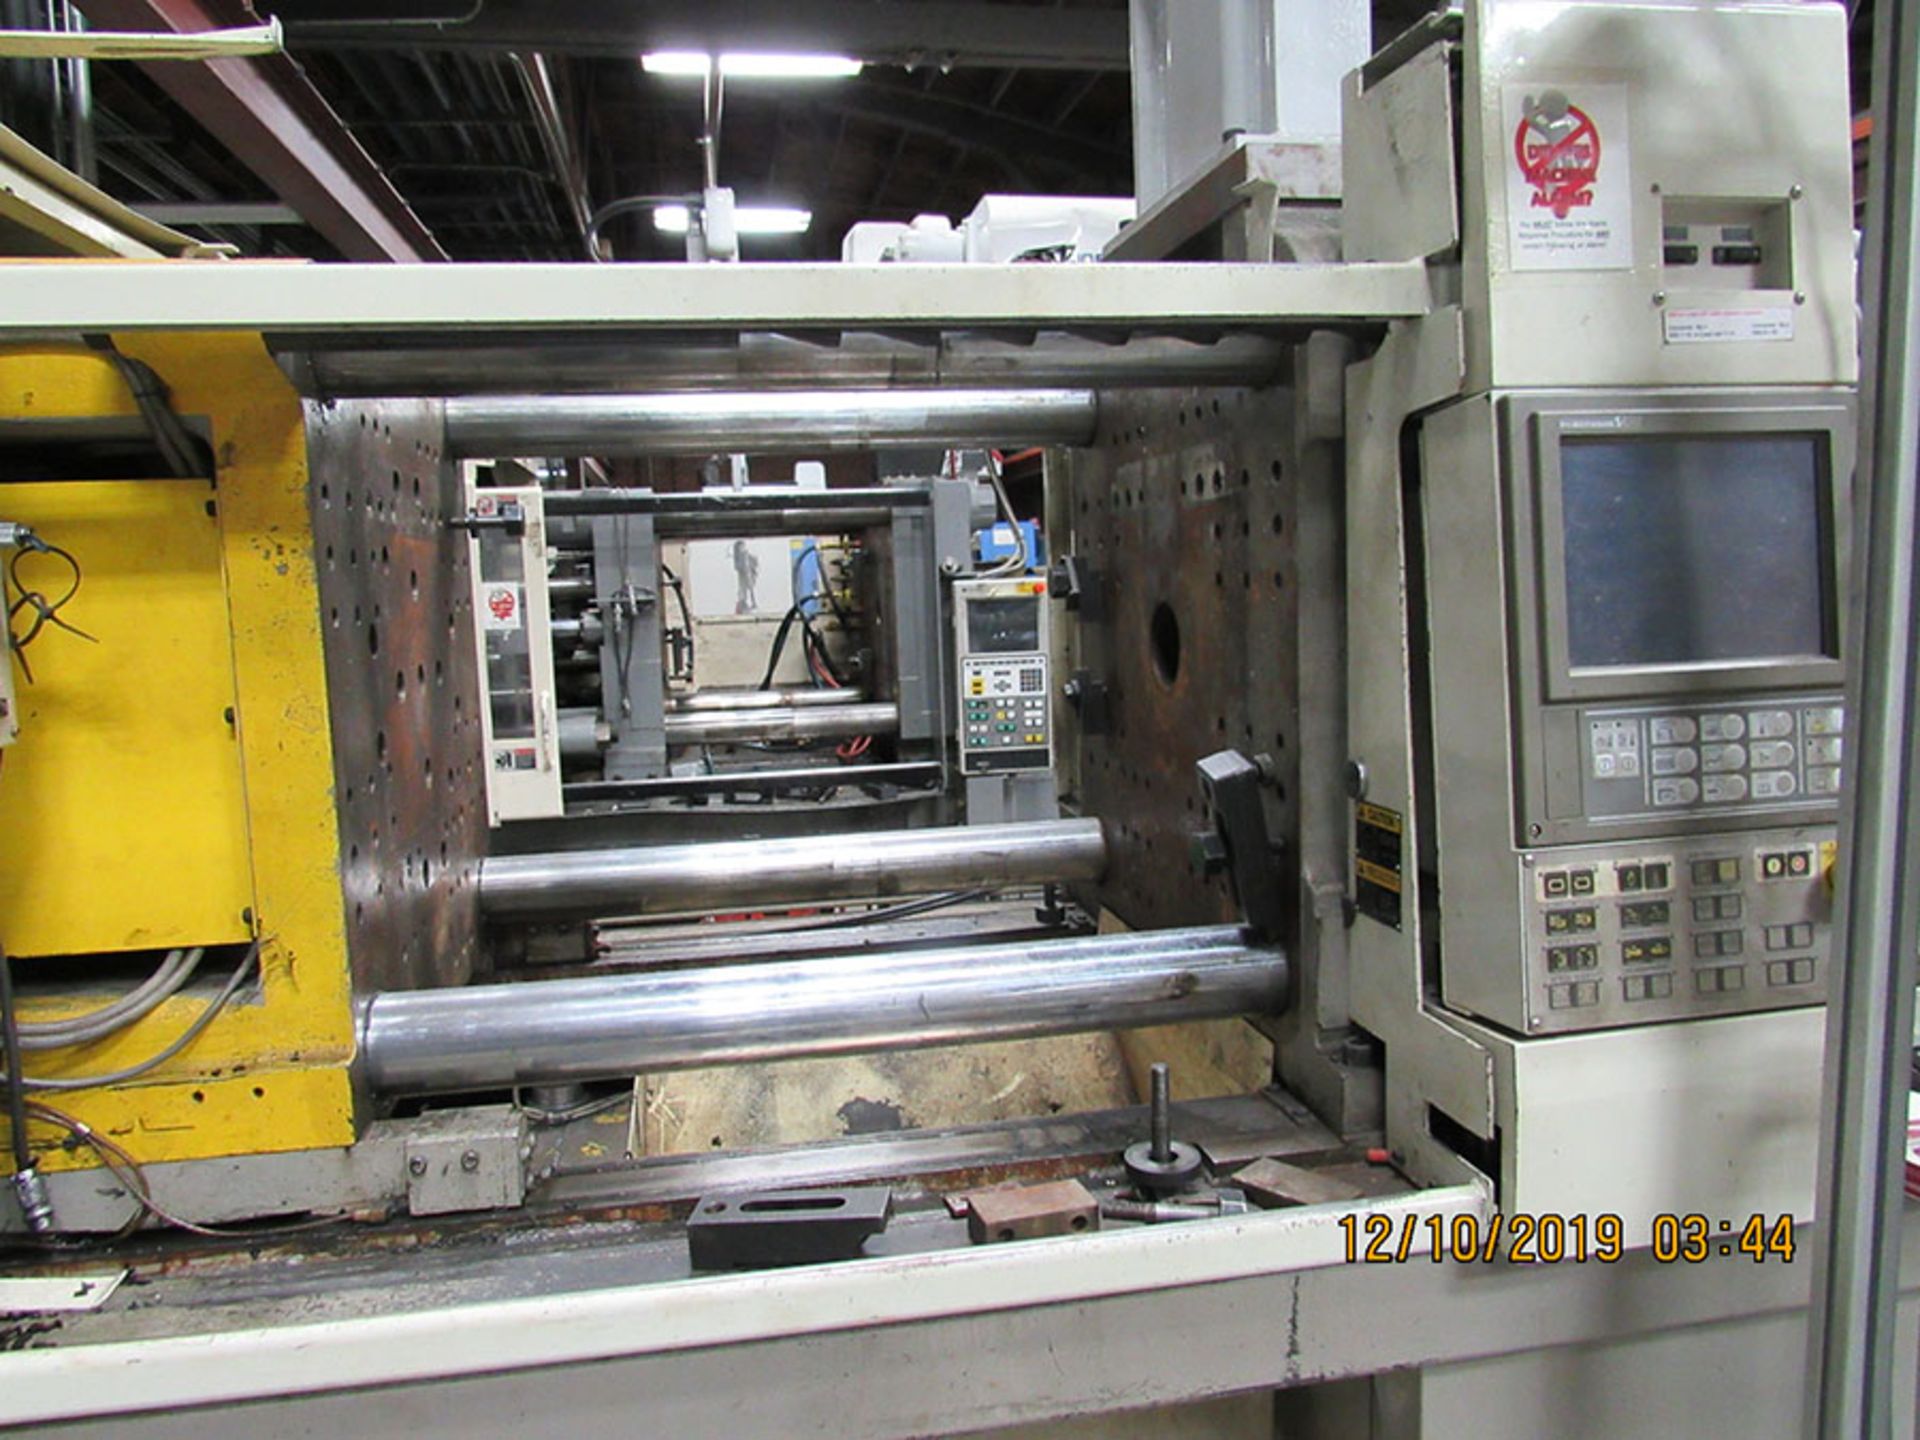 TOSHIBA EC 180V21-6A PLASTIC INJECTION MOLDING MACHINE; NEW IN 2002, S/N 227610, ALL ELECTRIC, - Image 3 of 3